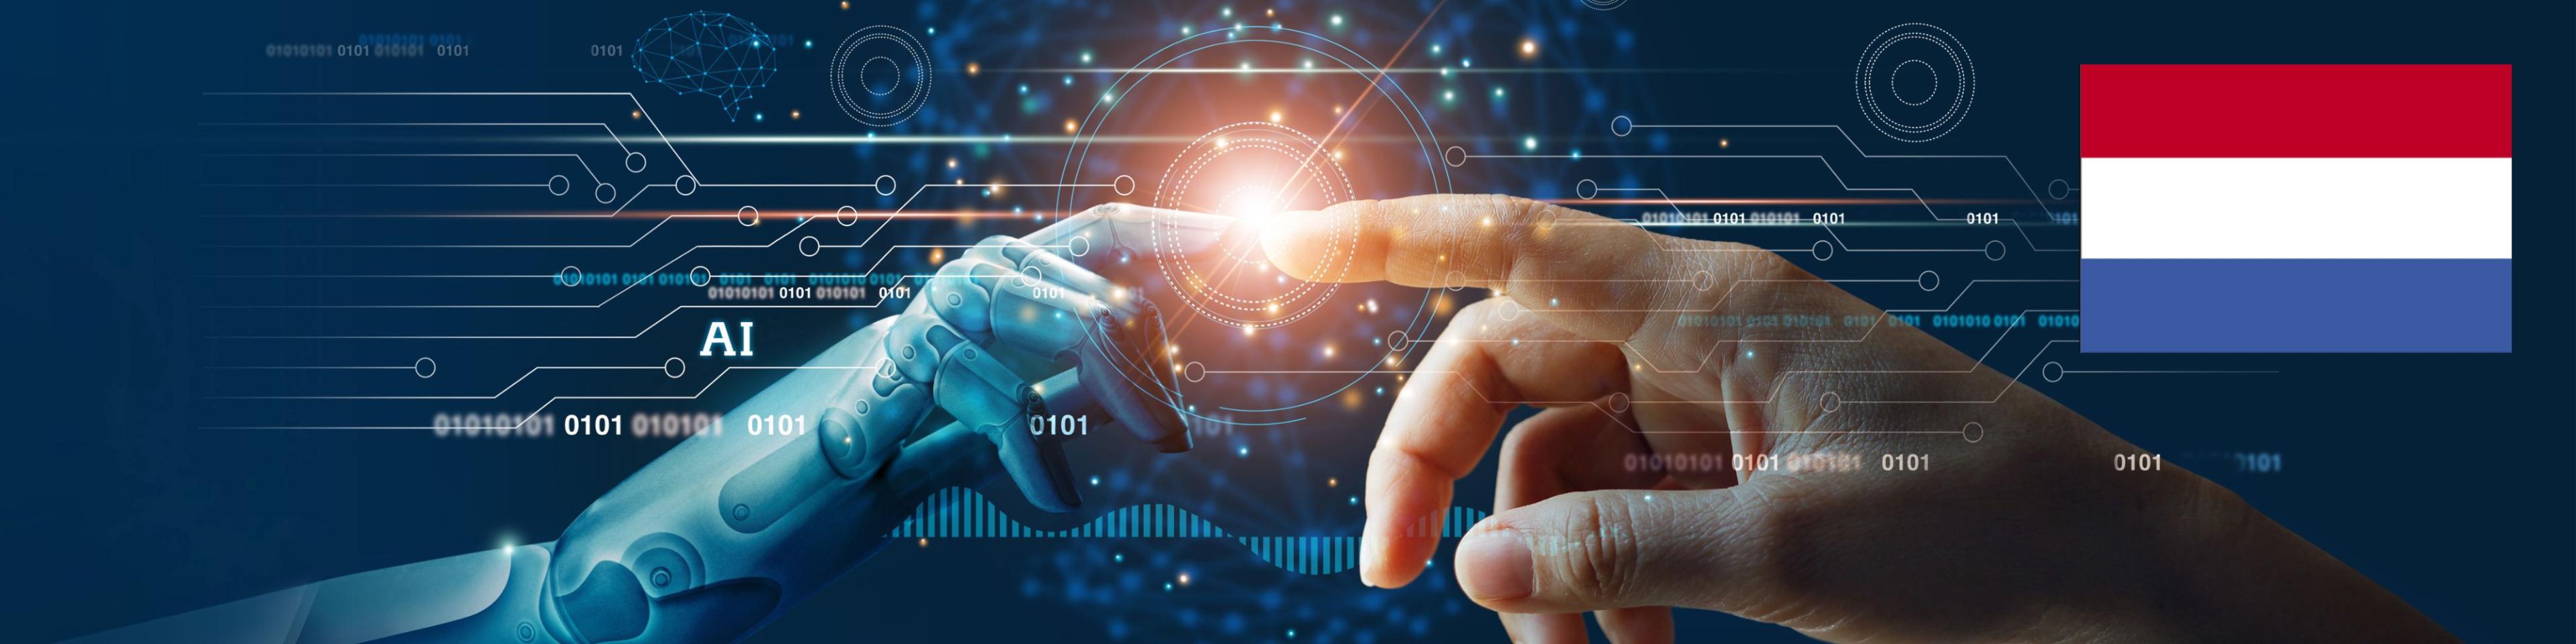 AI, Machine learning, Hands of robot and human touching on big data network connection background, Science and artificial intelligence technology